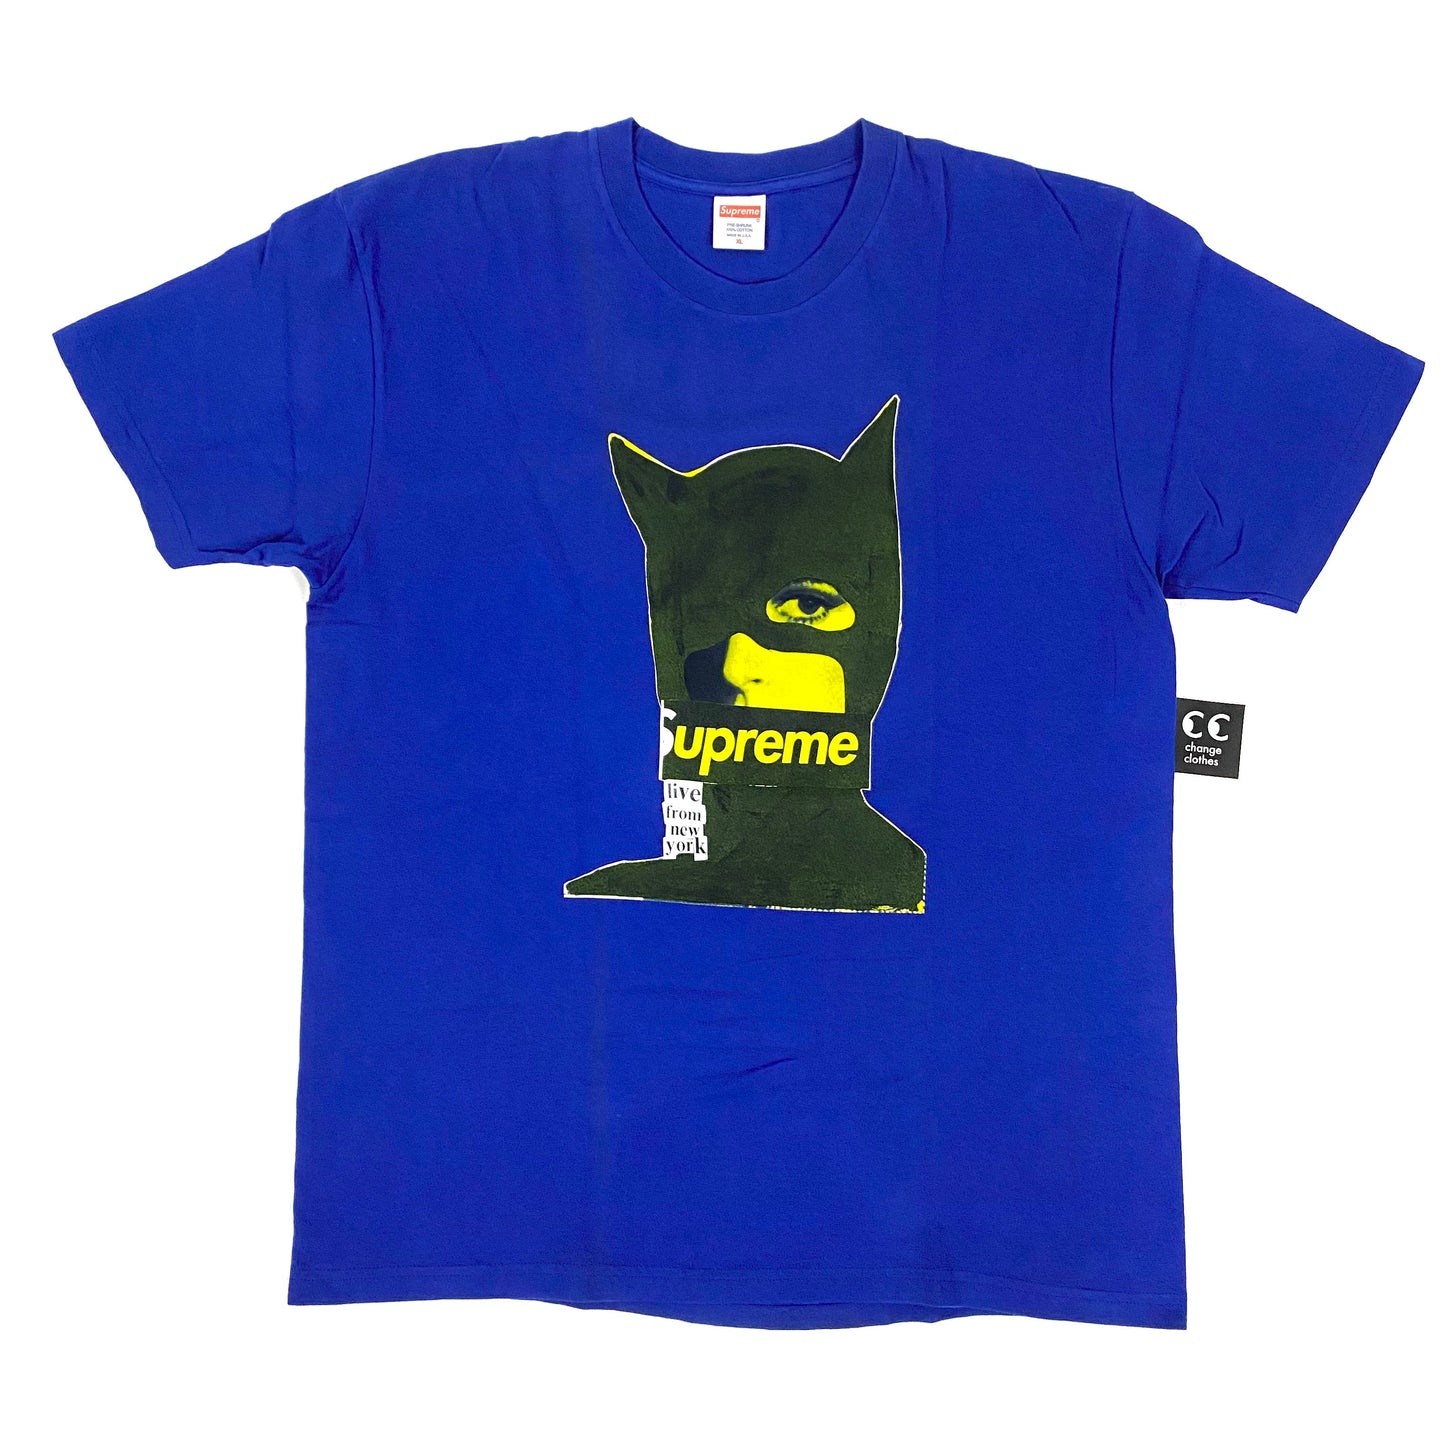 Supreme Cats Tee Shirt Catwoman 2013 – change clothes